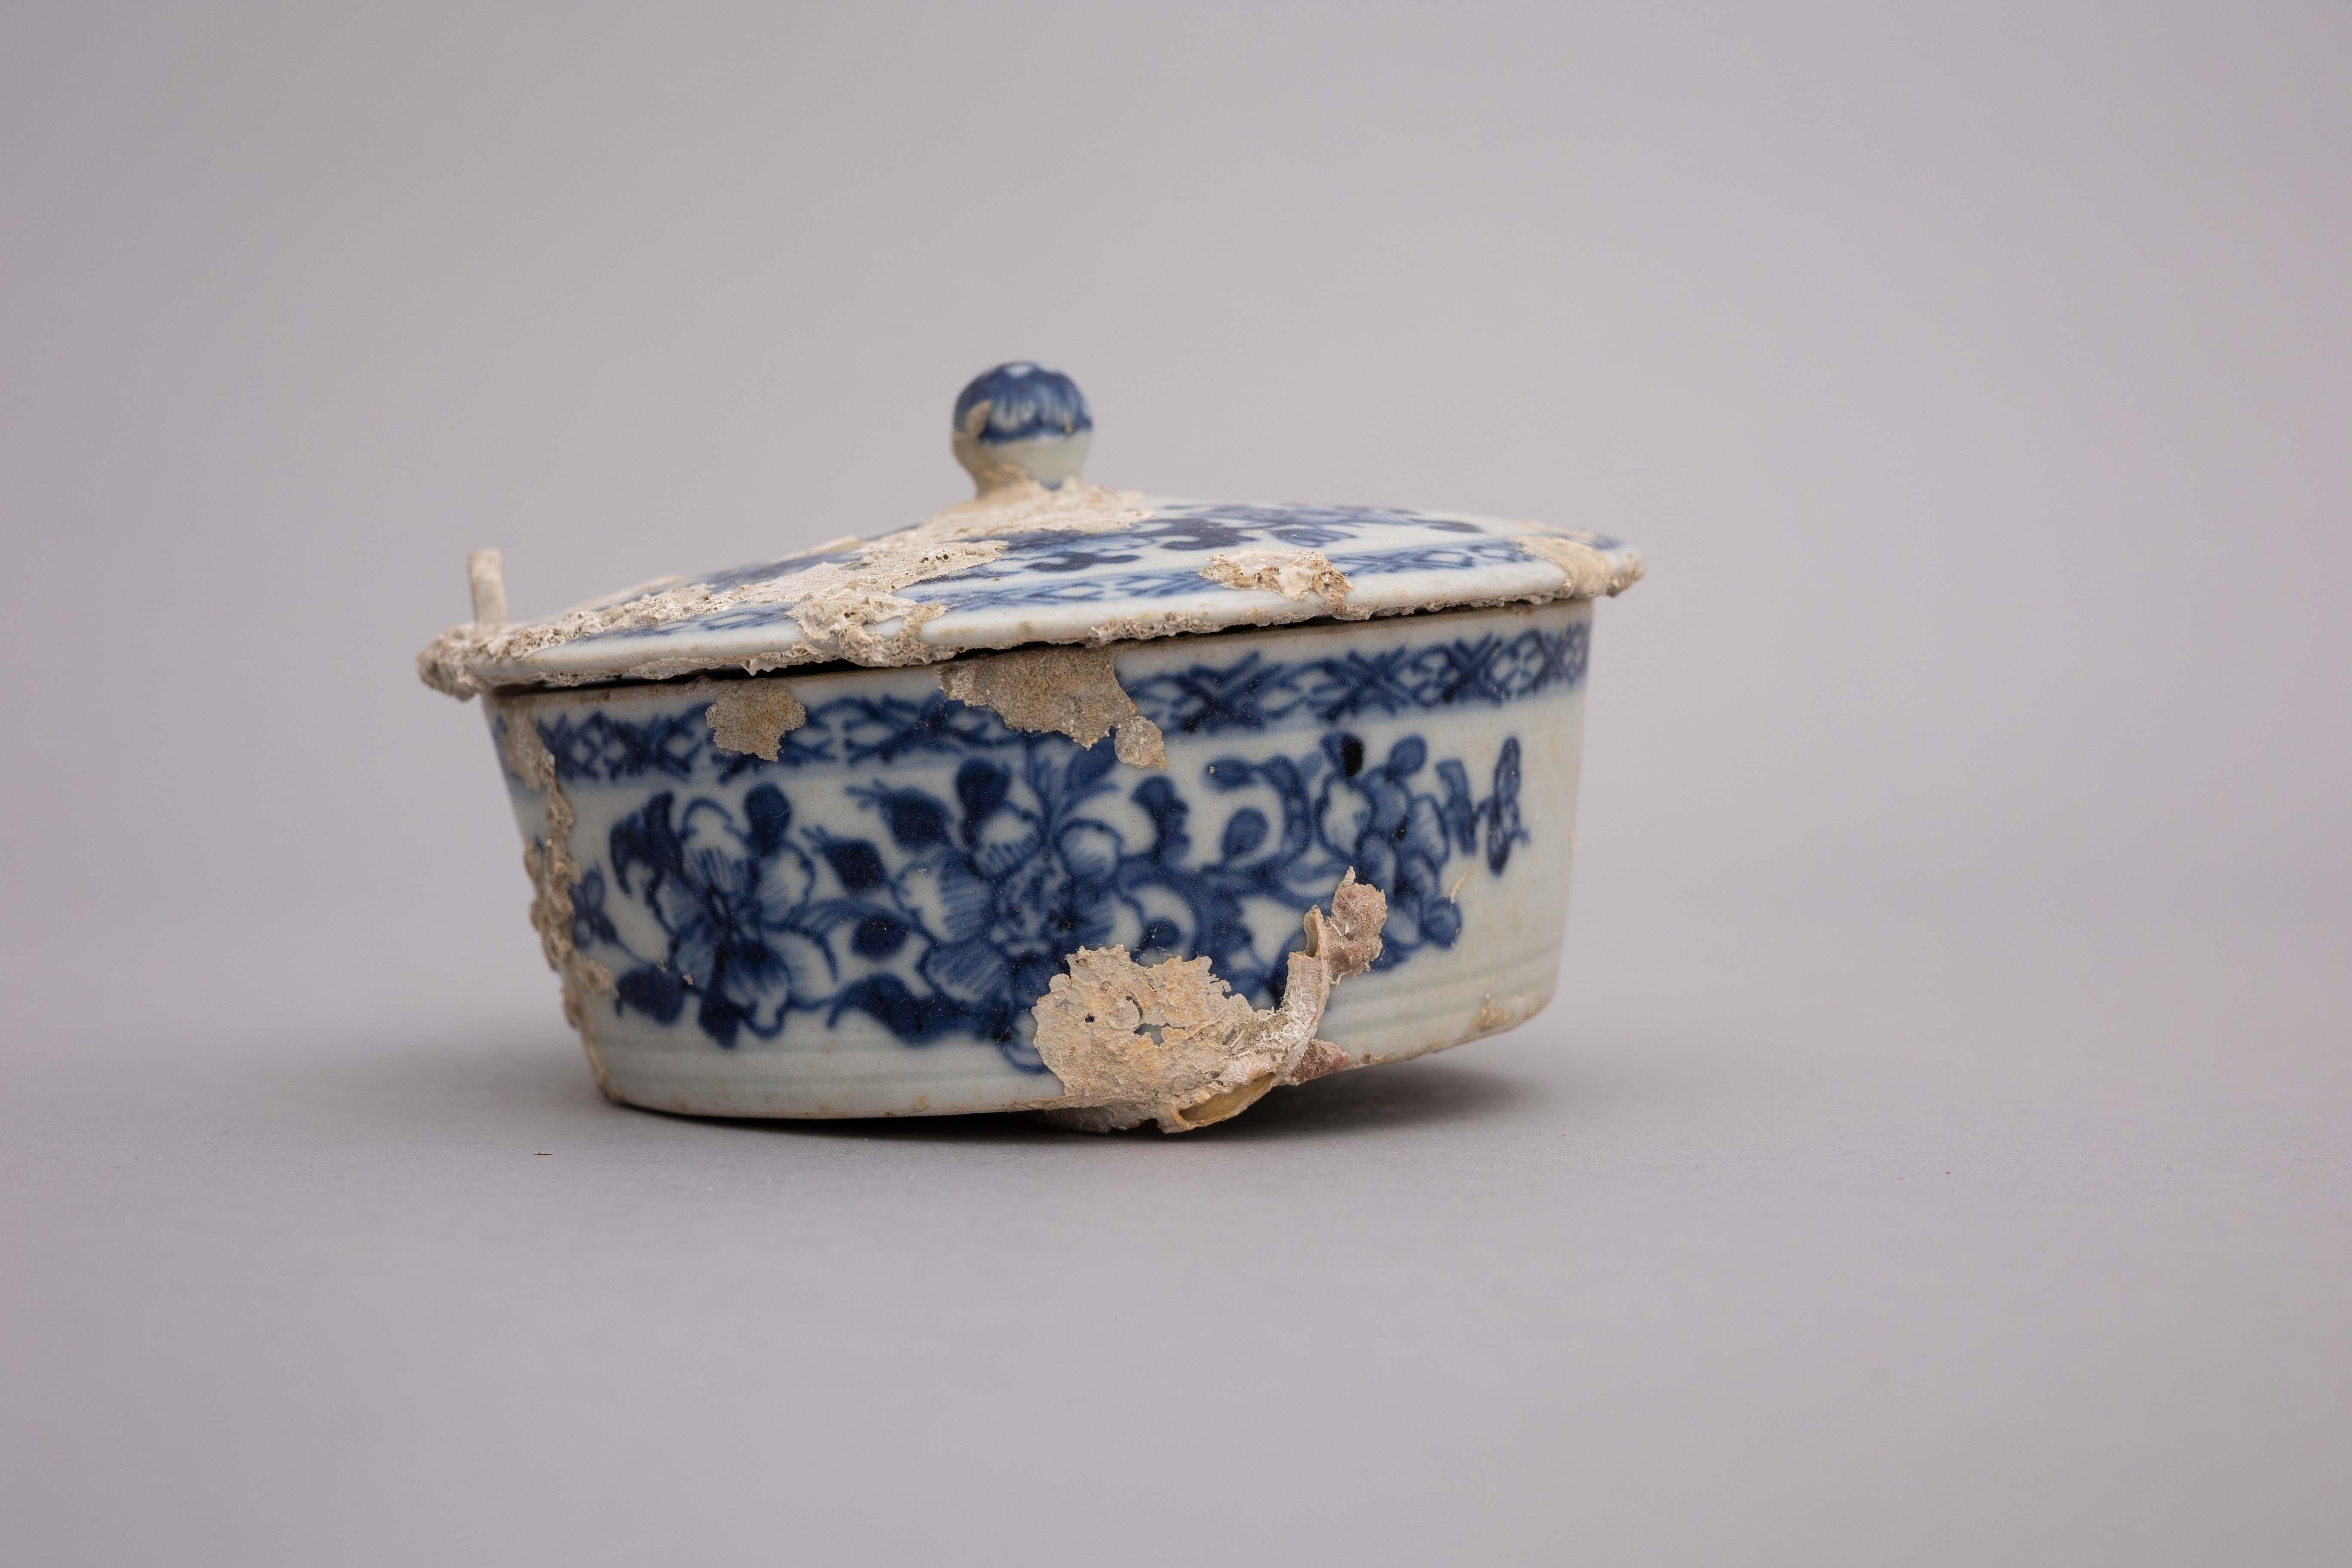 Shipwrecked 18th Century Blue and White Chinese Porcelain Butter Tub In Distressed Condition For Sale In Fort Lauderdale, FL